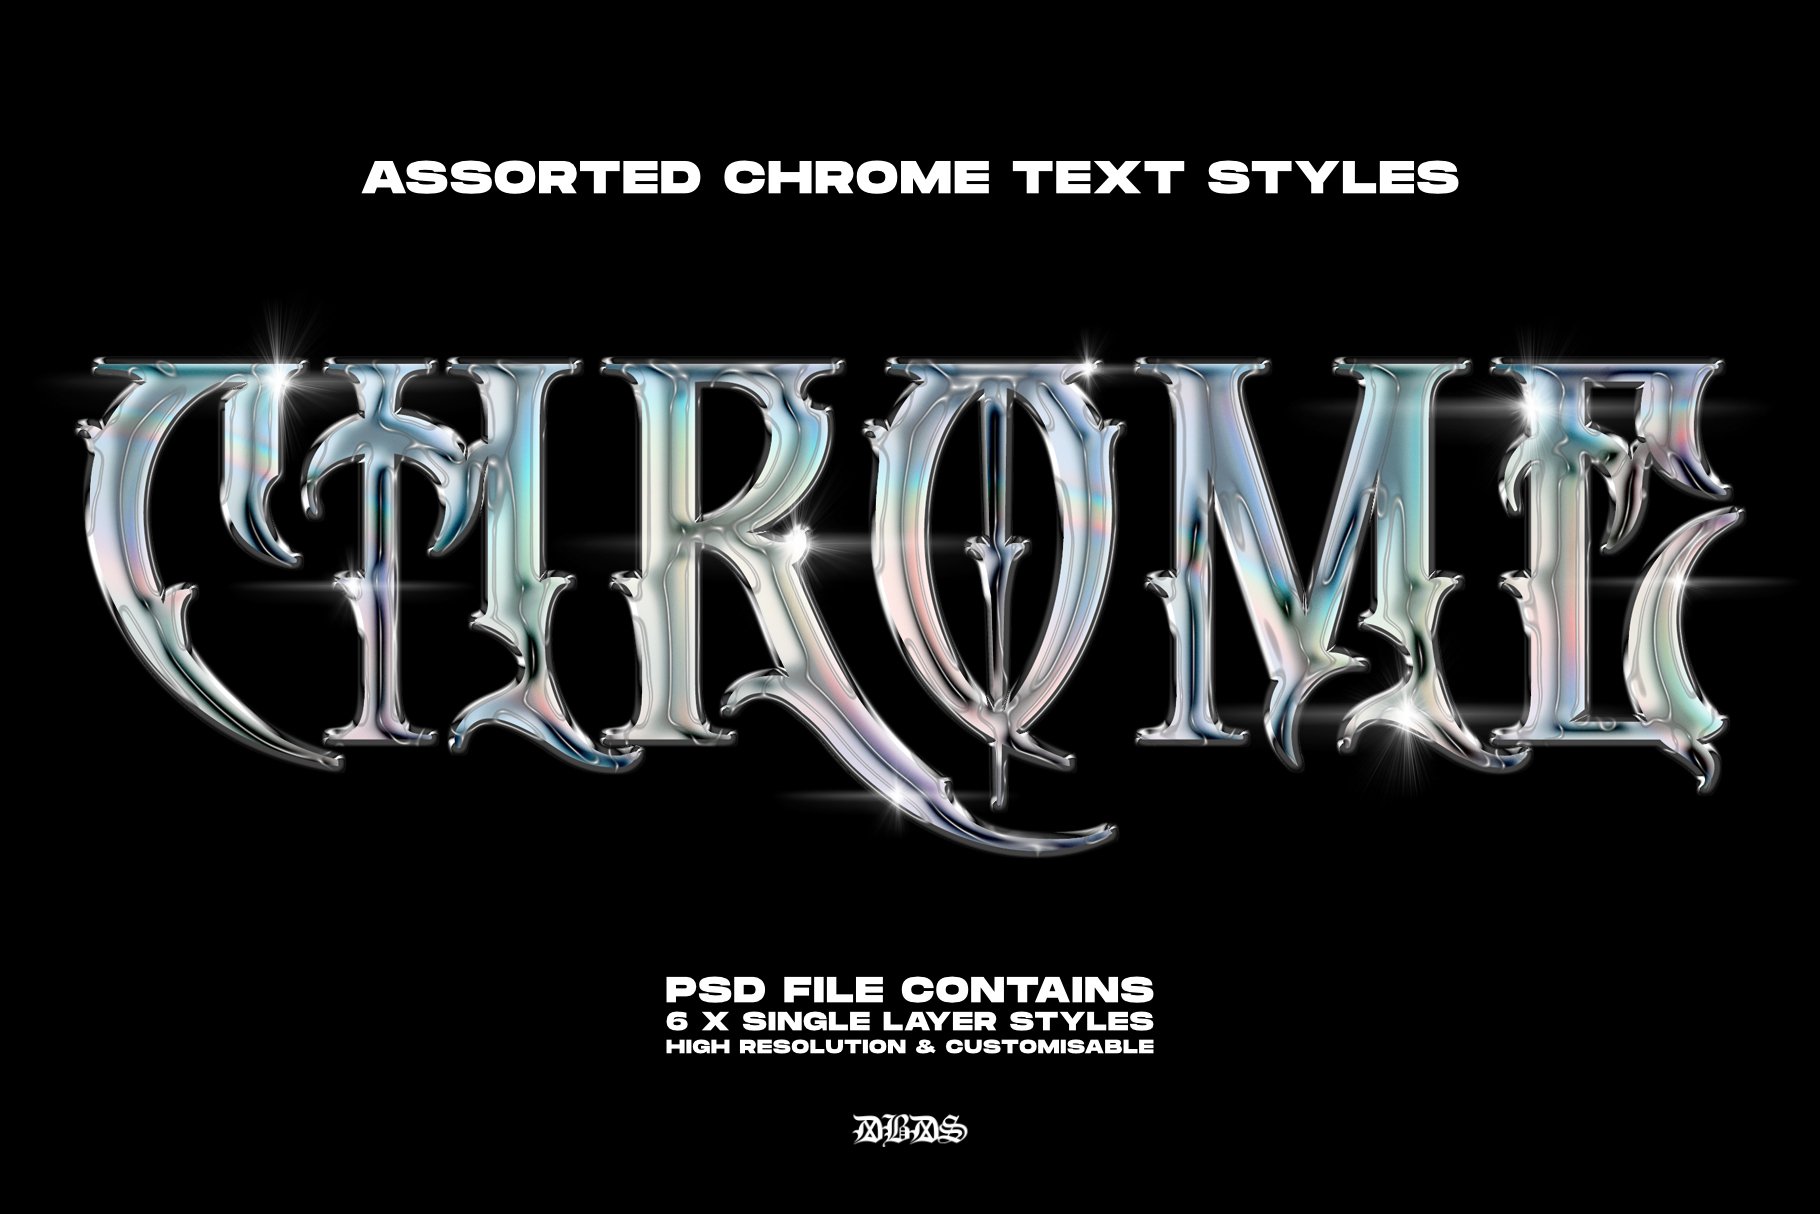 Chrome Metal Text Stylescover image.